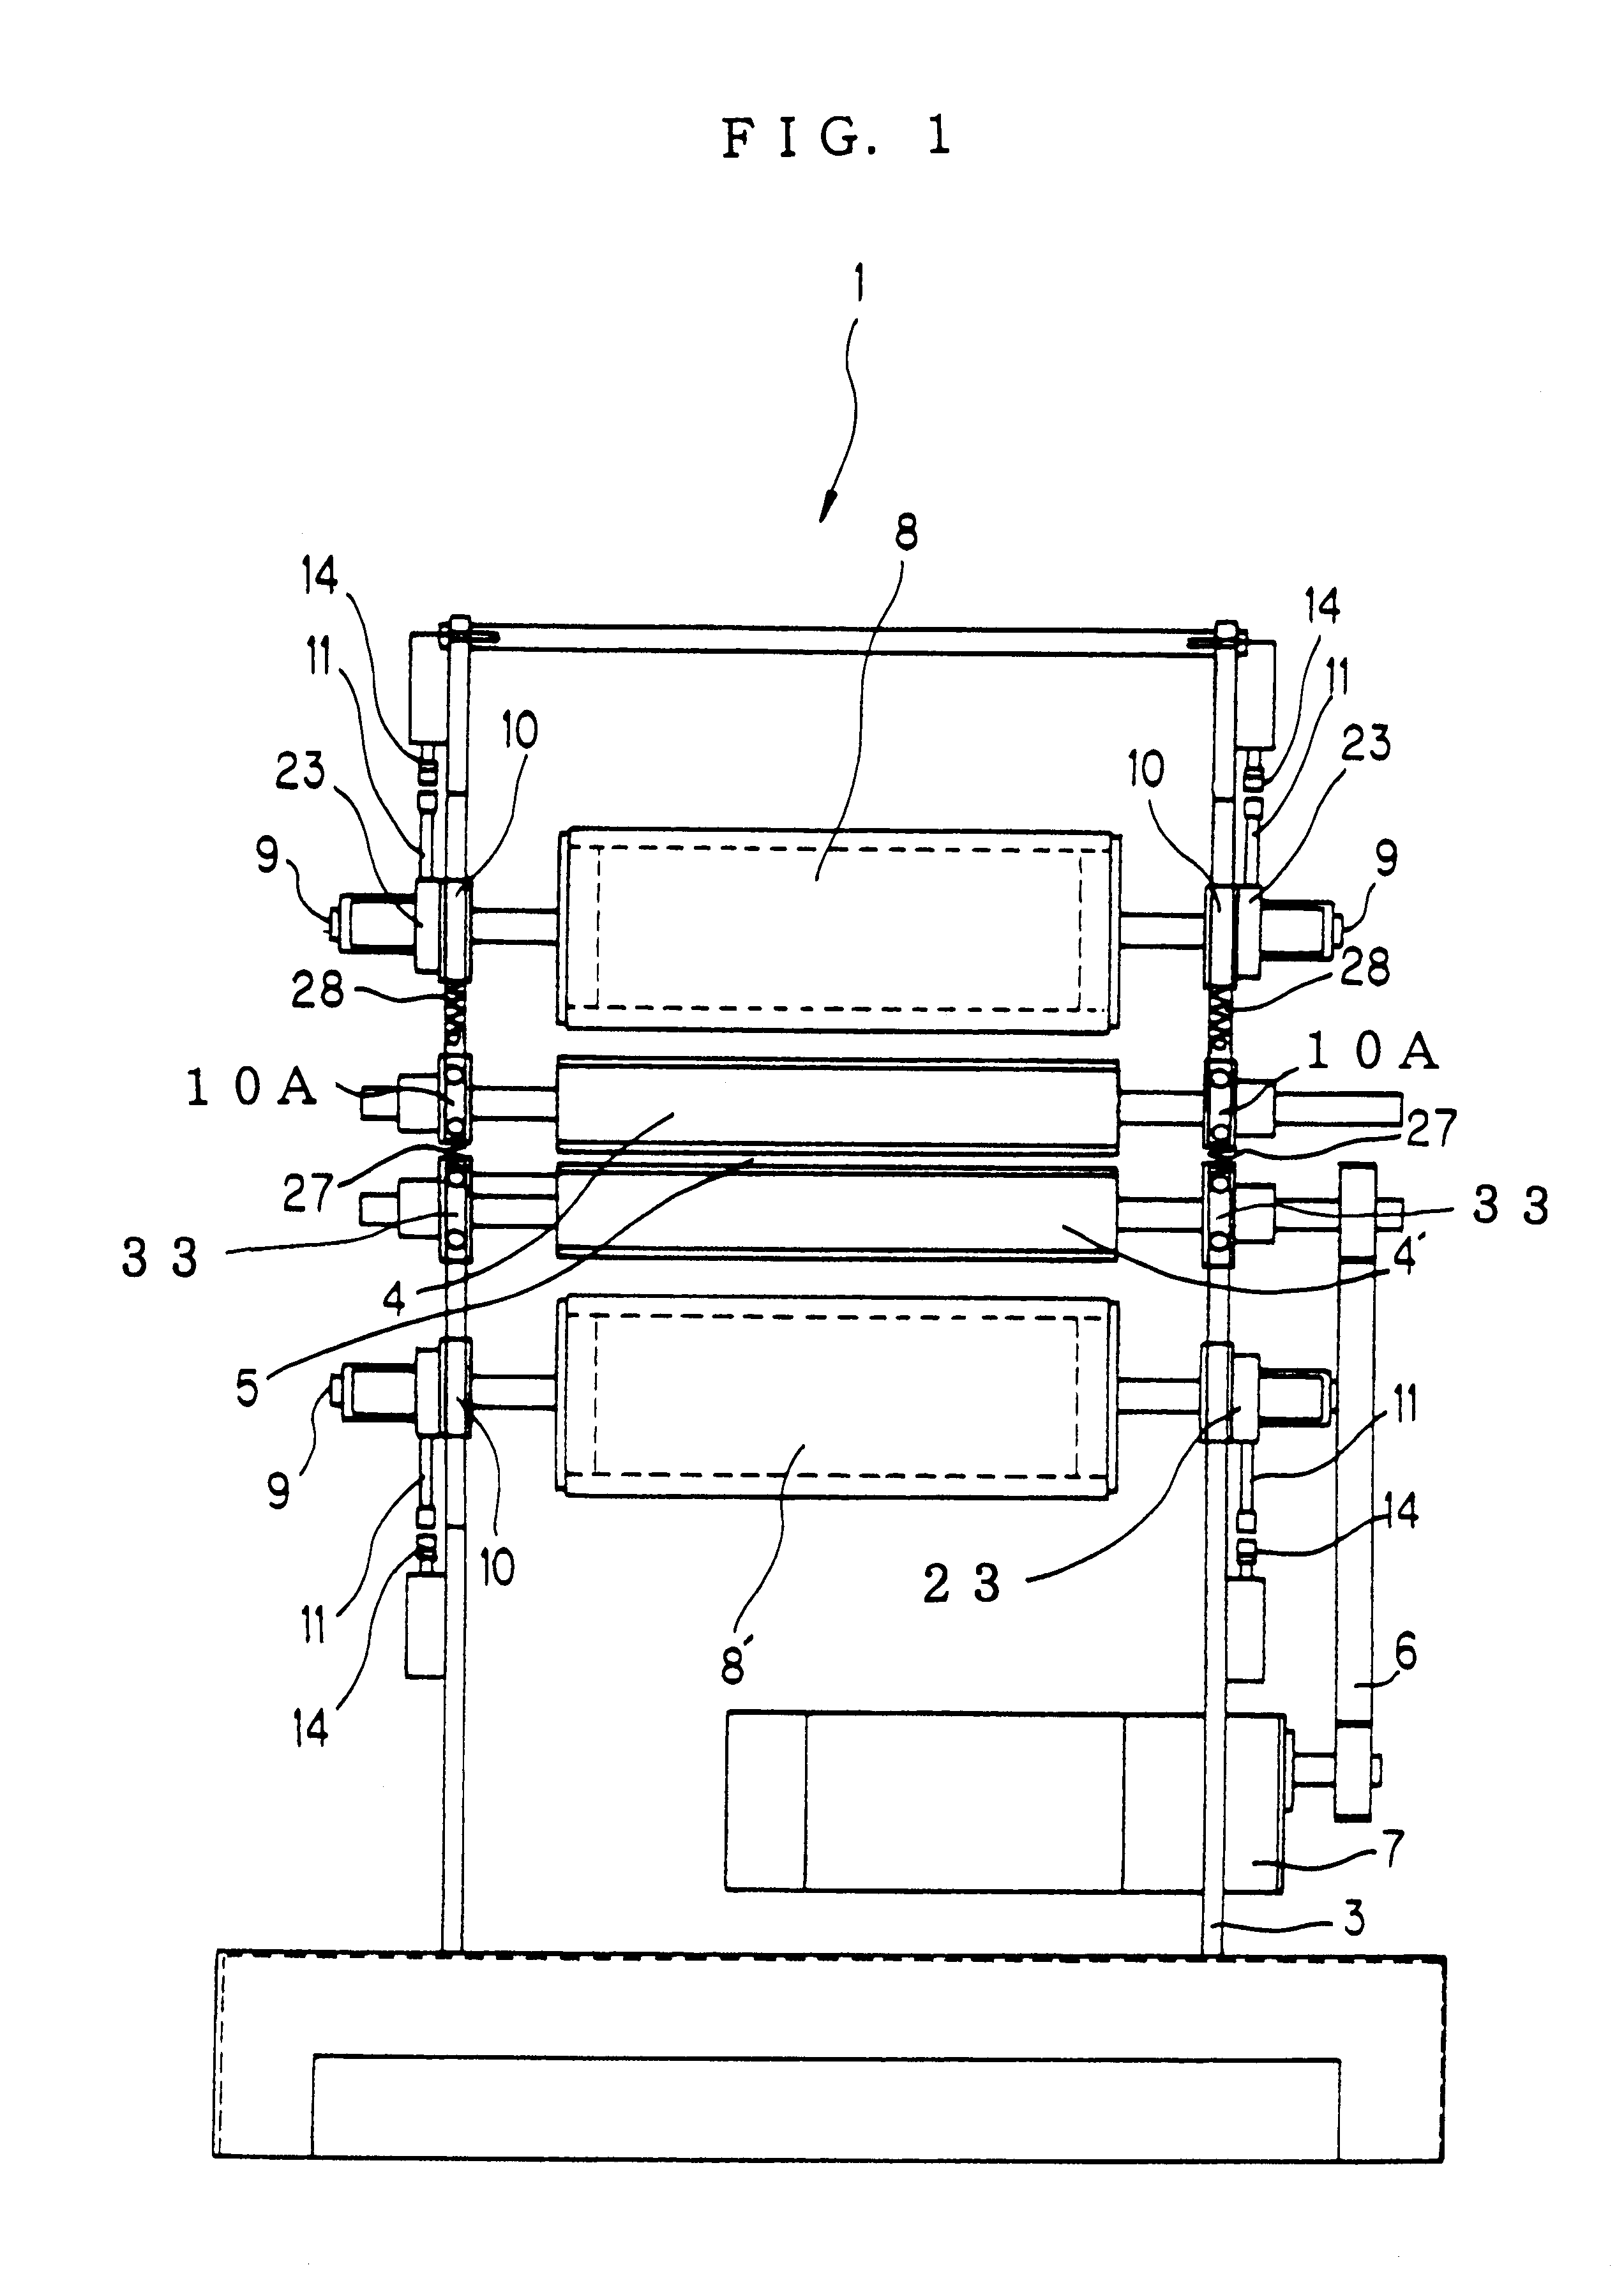 Substrate or sheet surface cleaning apparatus